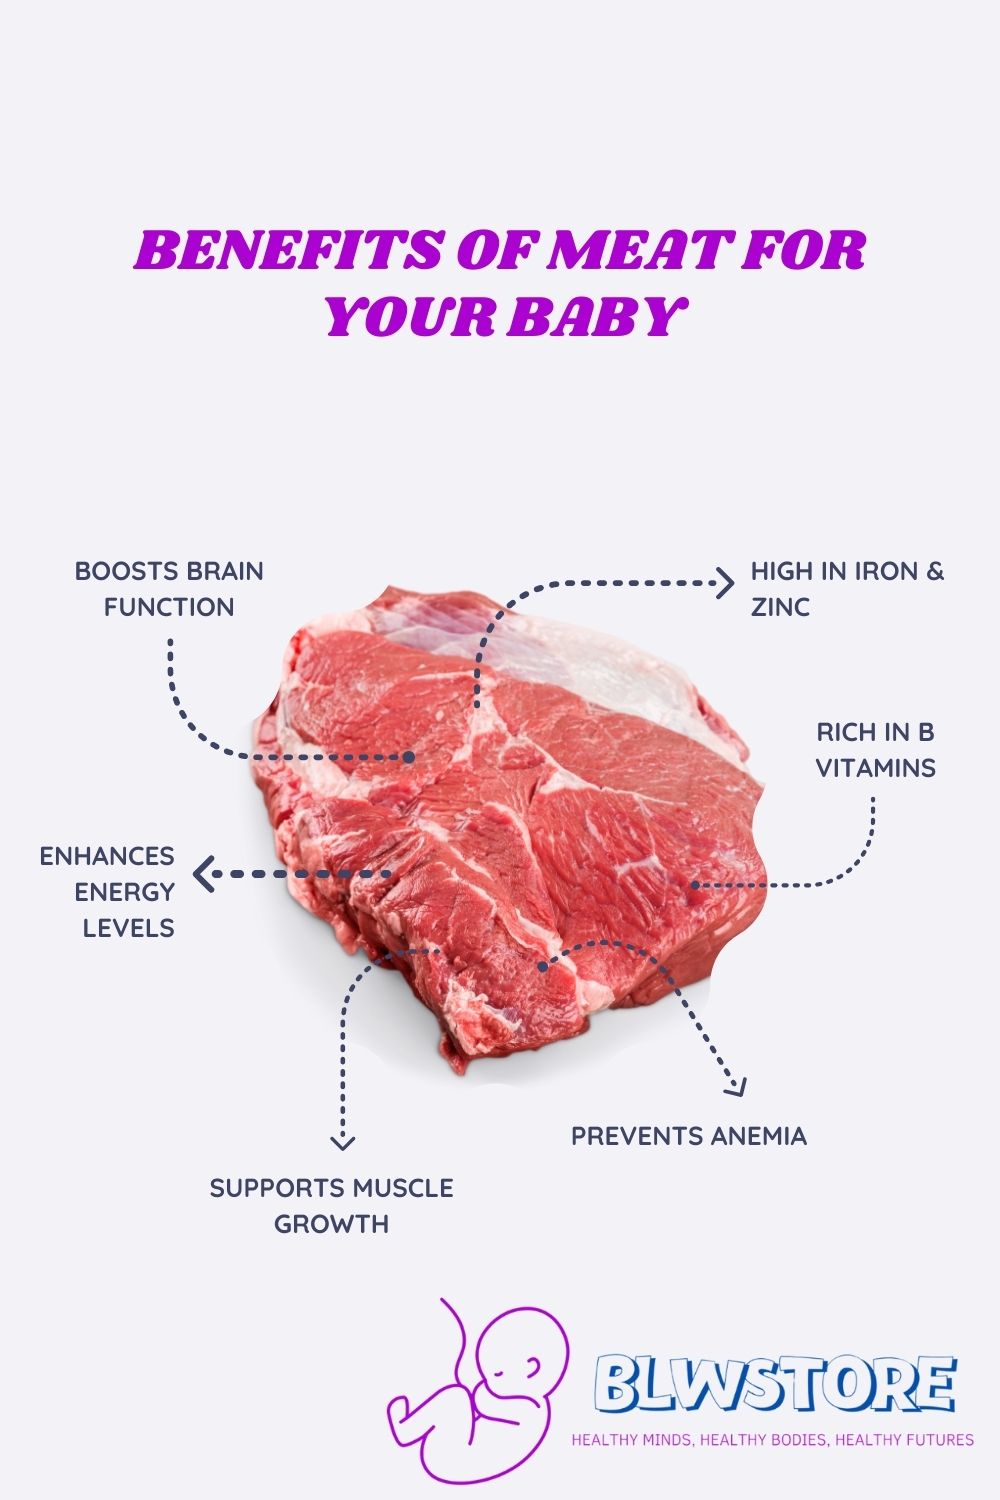 Benefits of Meat for your Baby